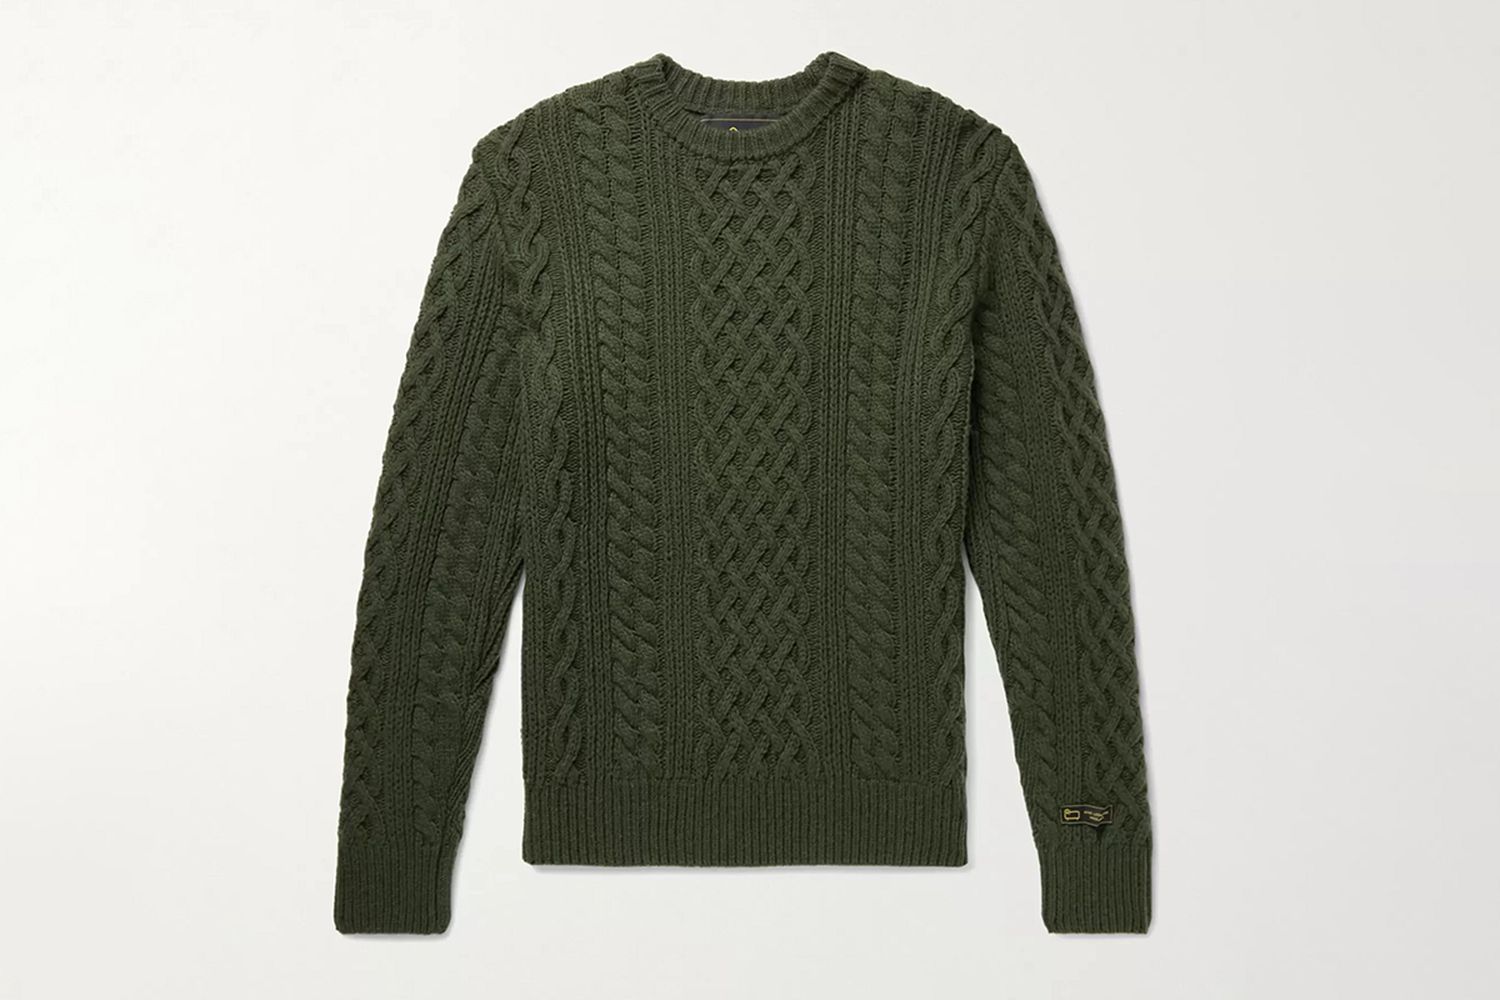 Cable-Knit Wool Sweater